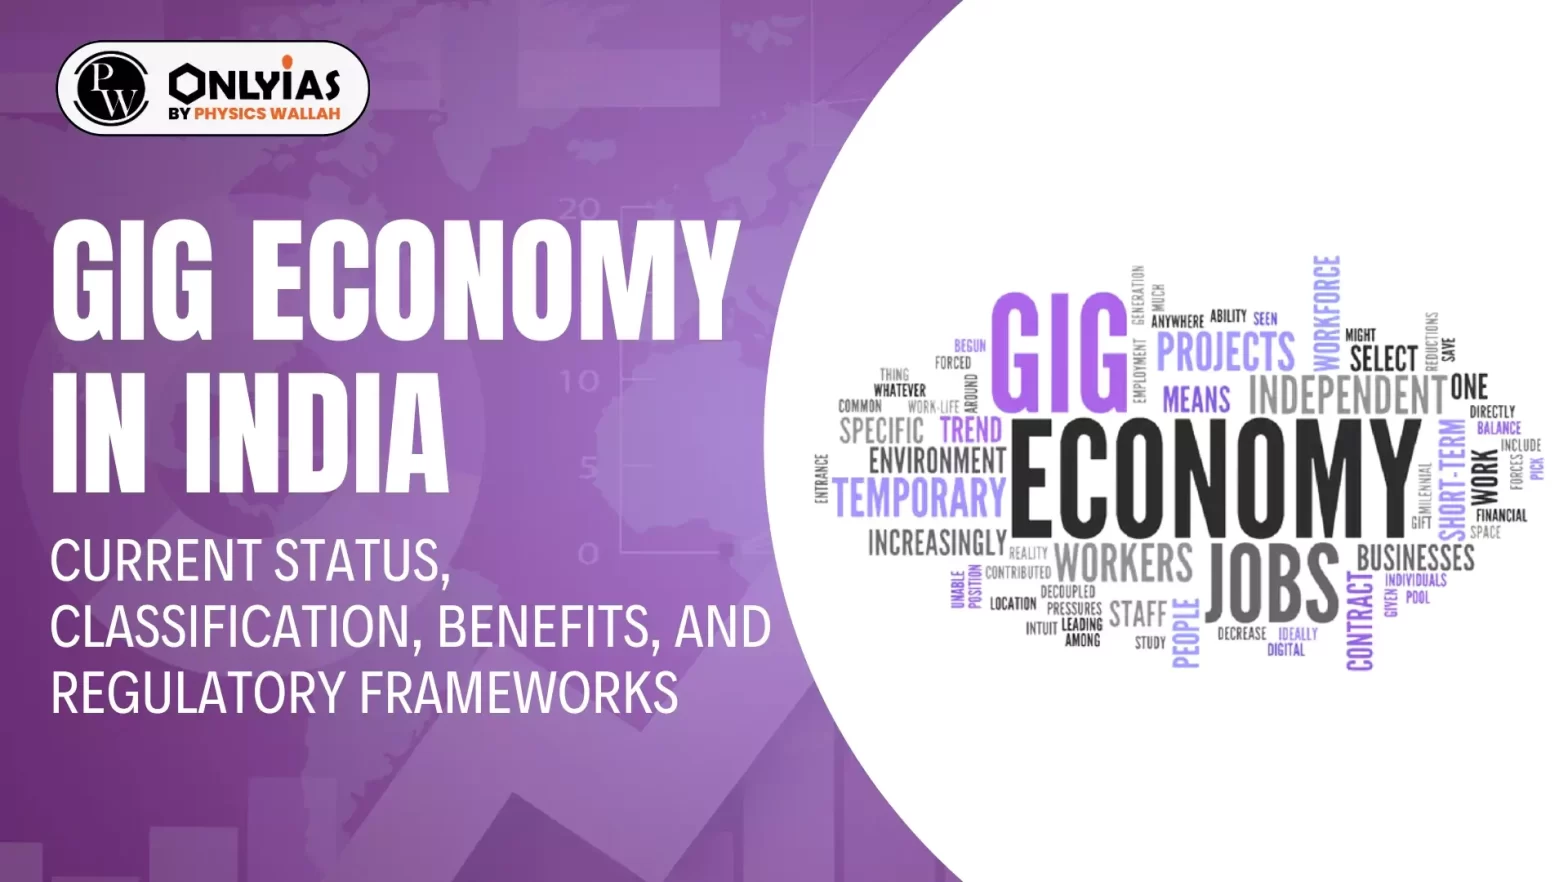 Gig Economy in India: Current Status, Classification, Benefits, and Regulatory Frameworks